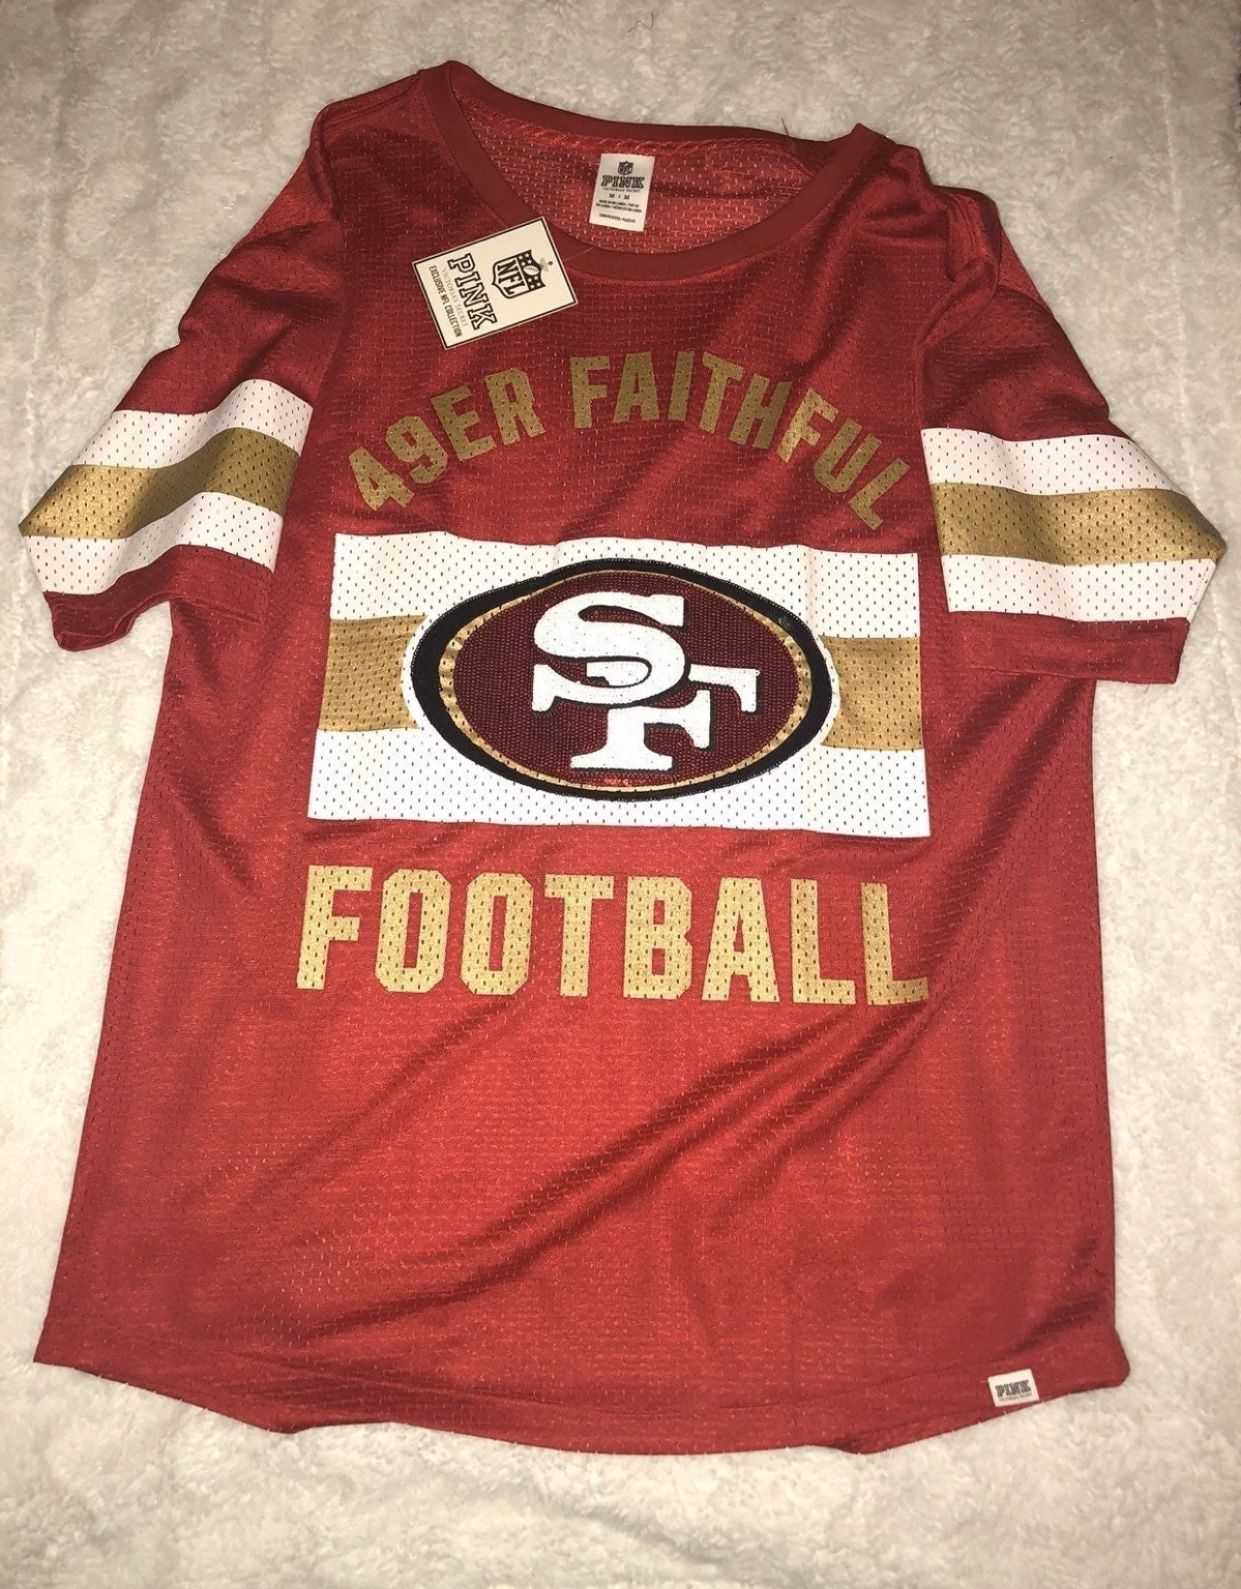 49ers women’s jersey from VS Pink